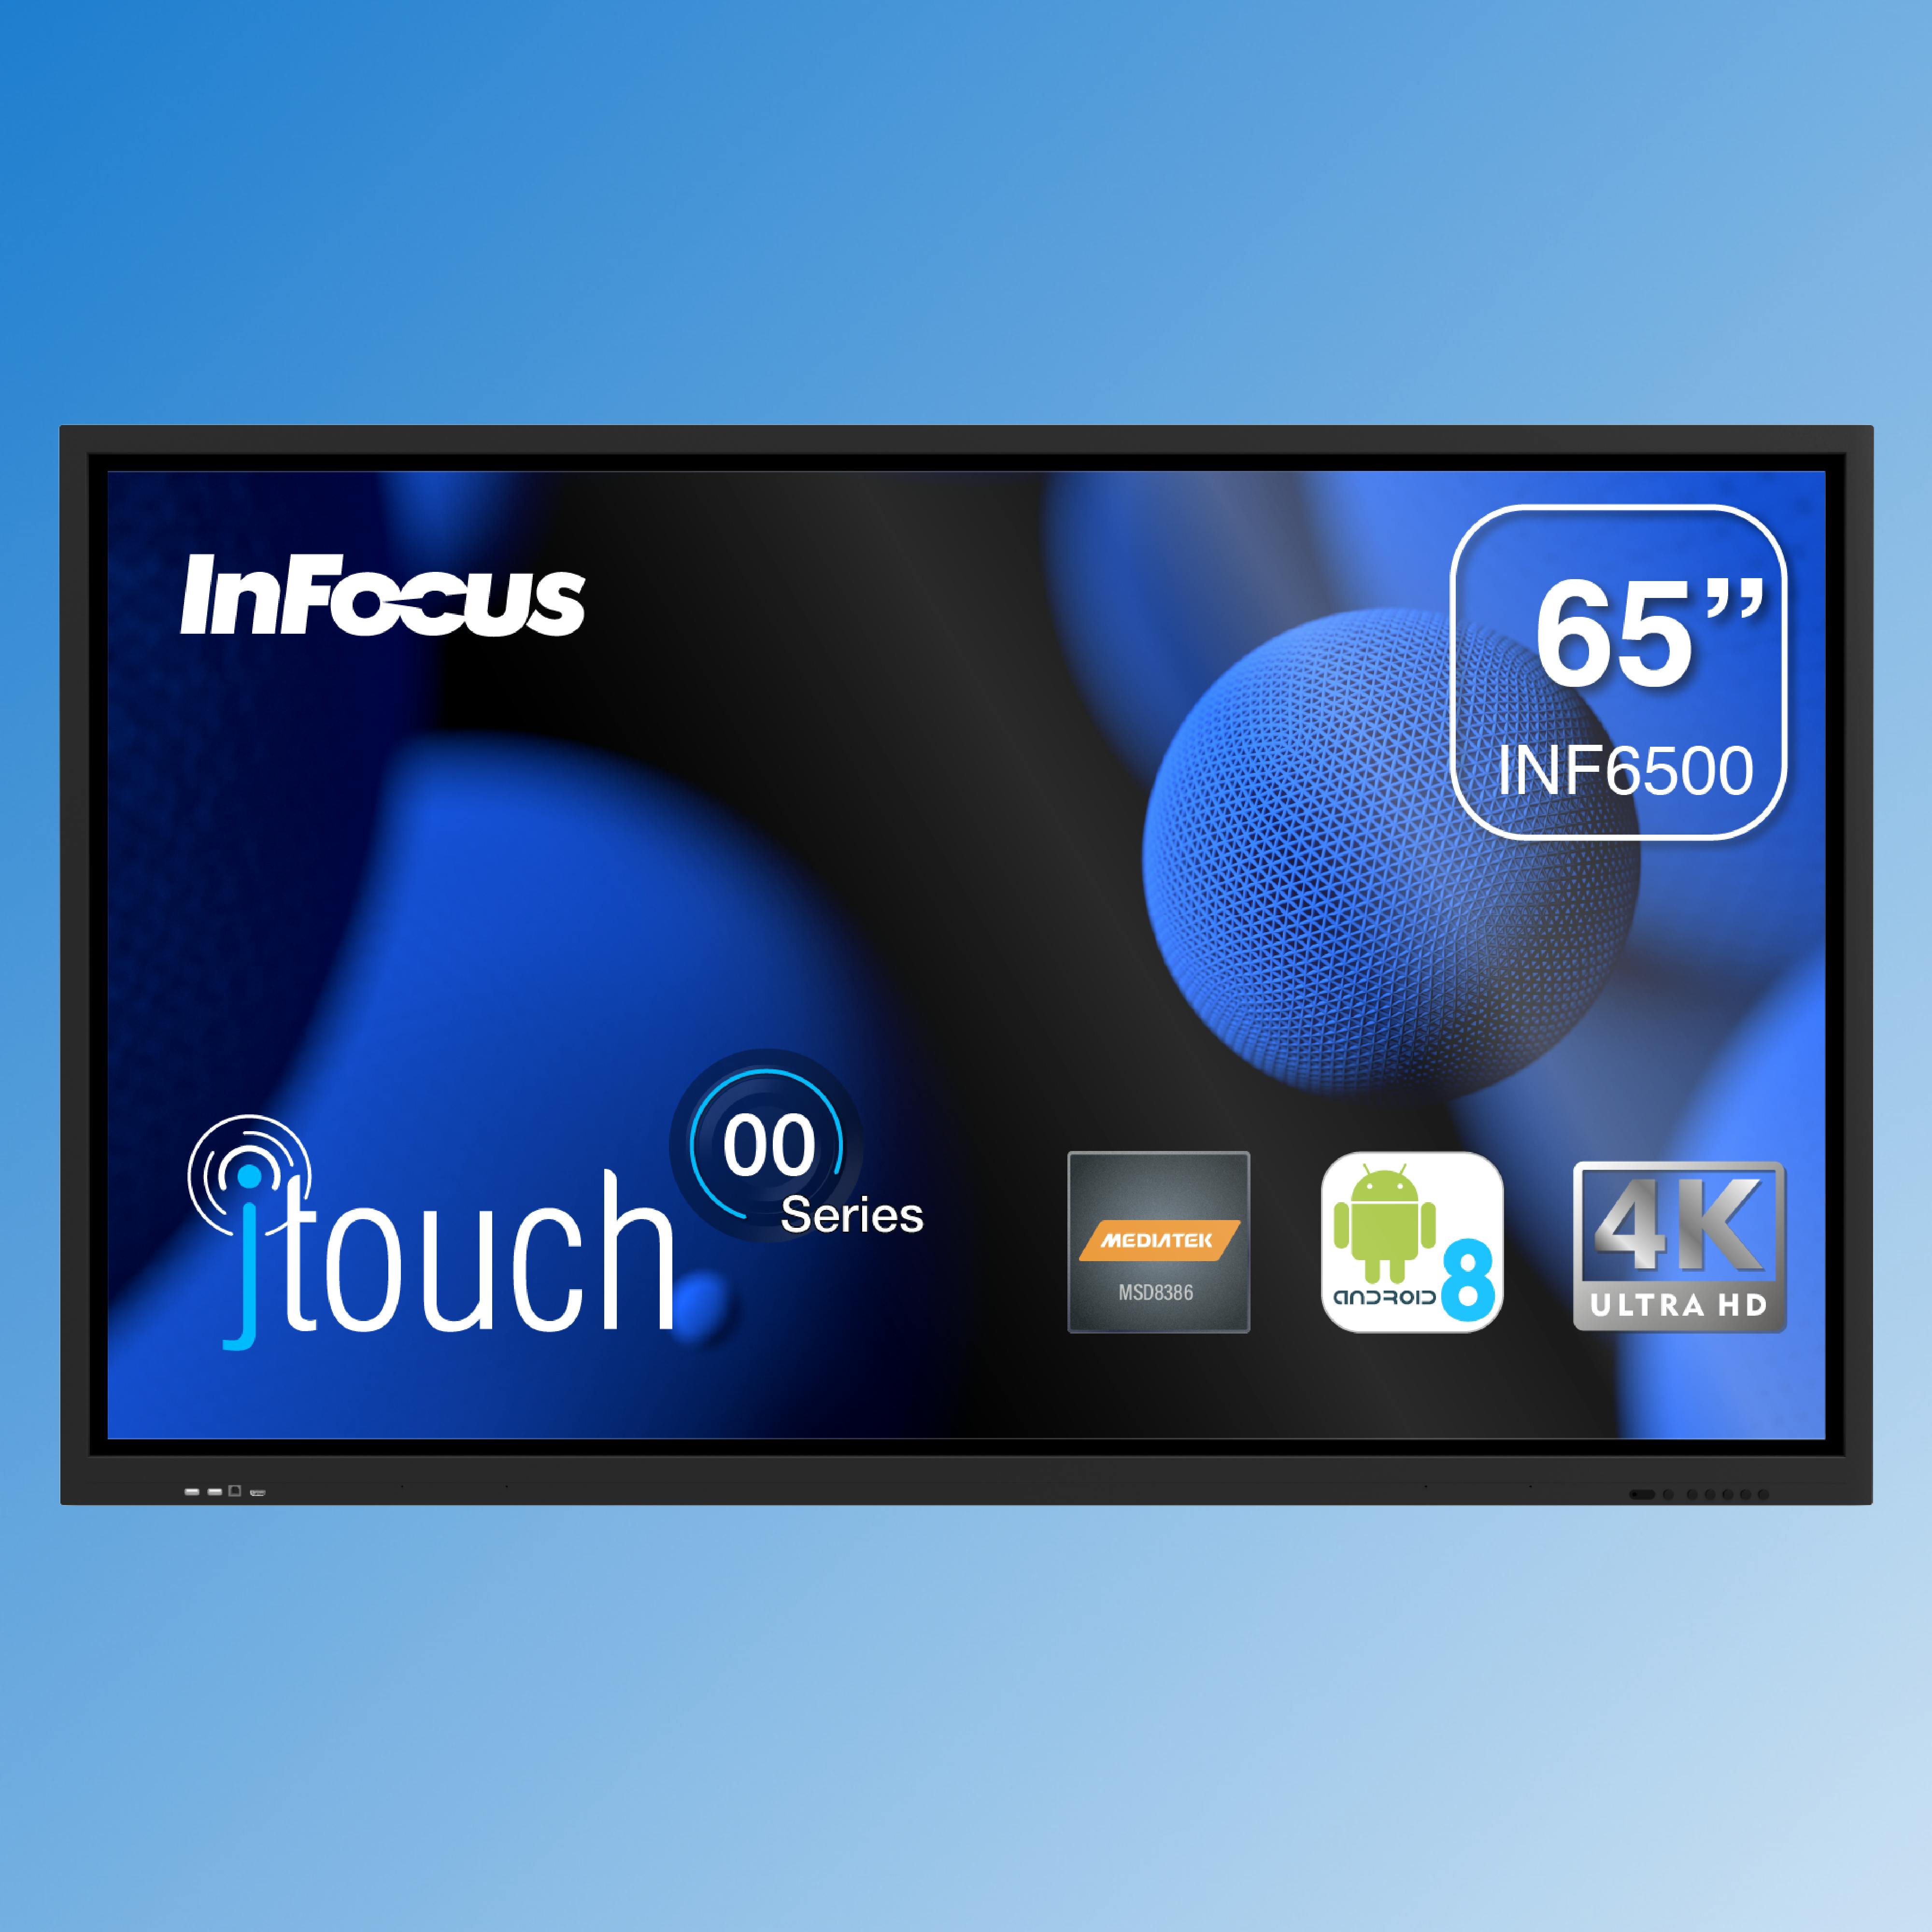 JTouch Series 00 - INF6500